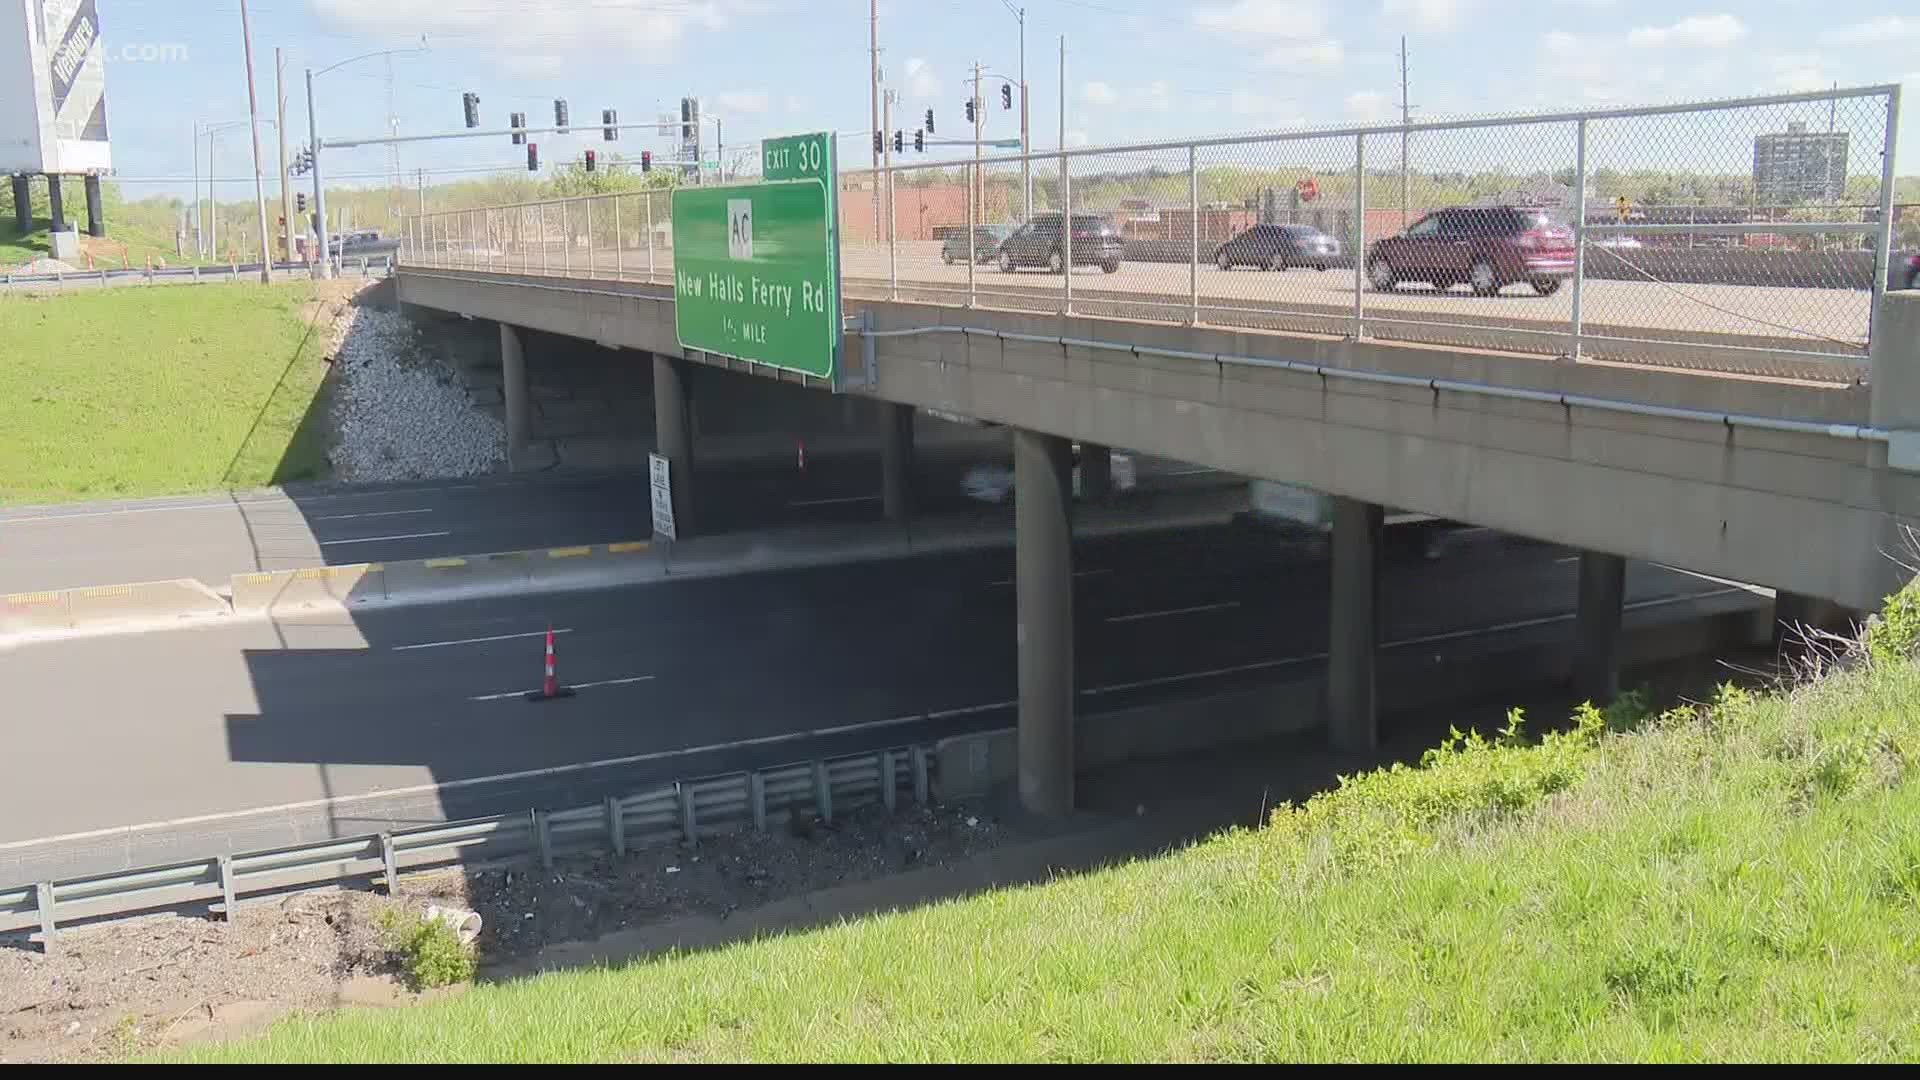 Both directions of a stretch of Interstate 270 will be closed starting Friday night to take down the bridge.